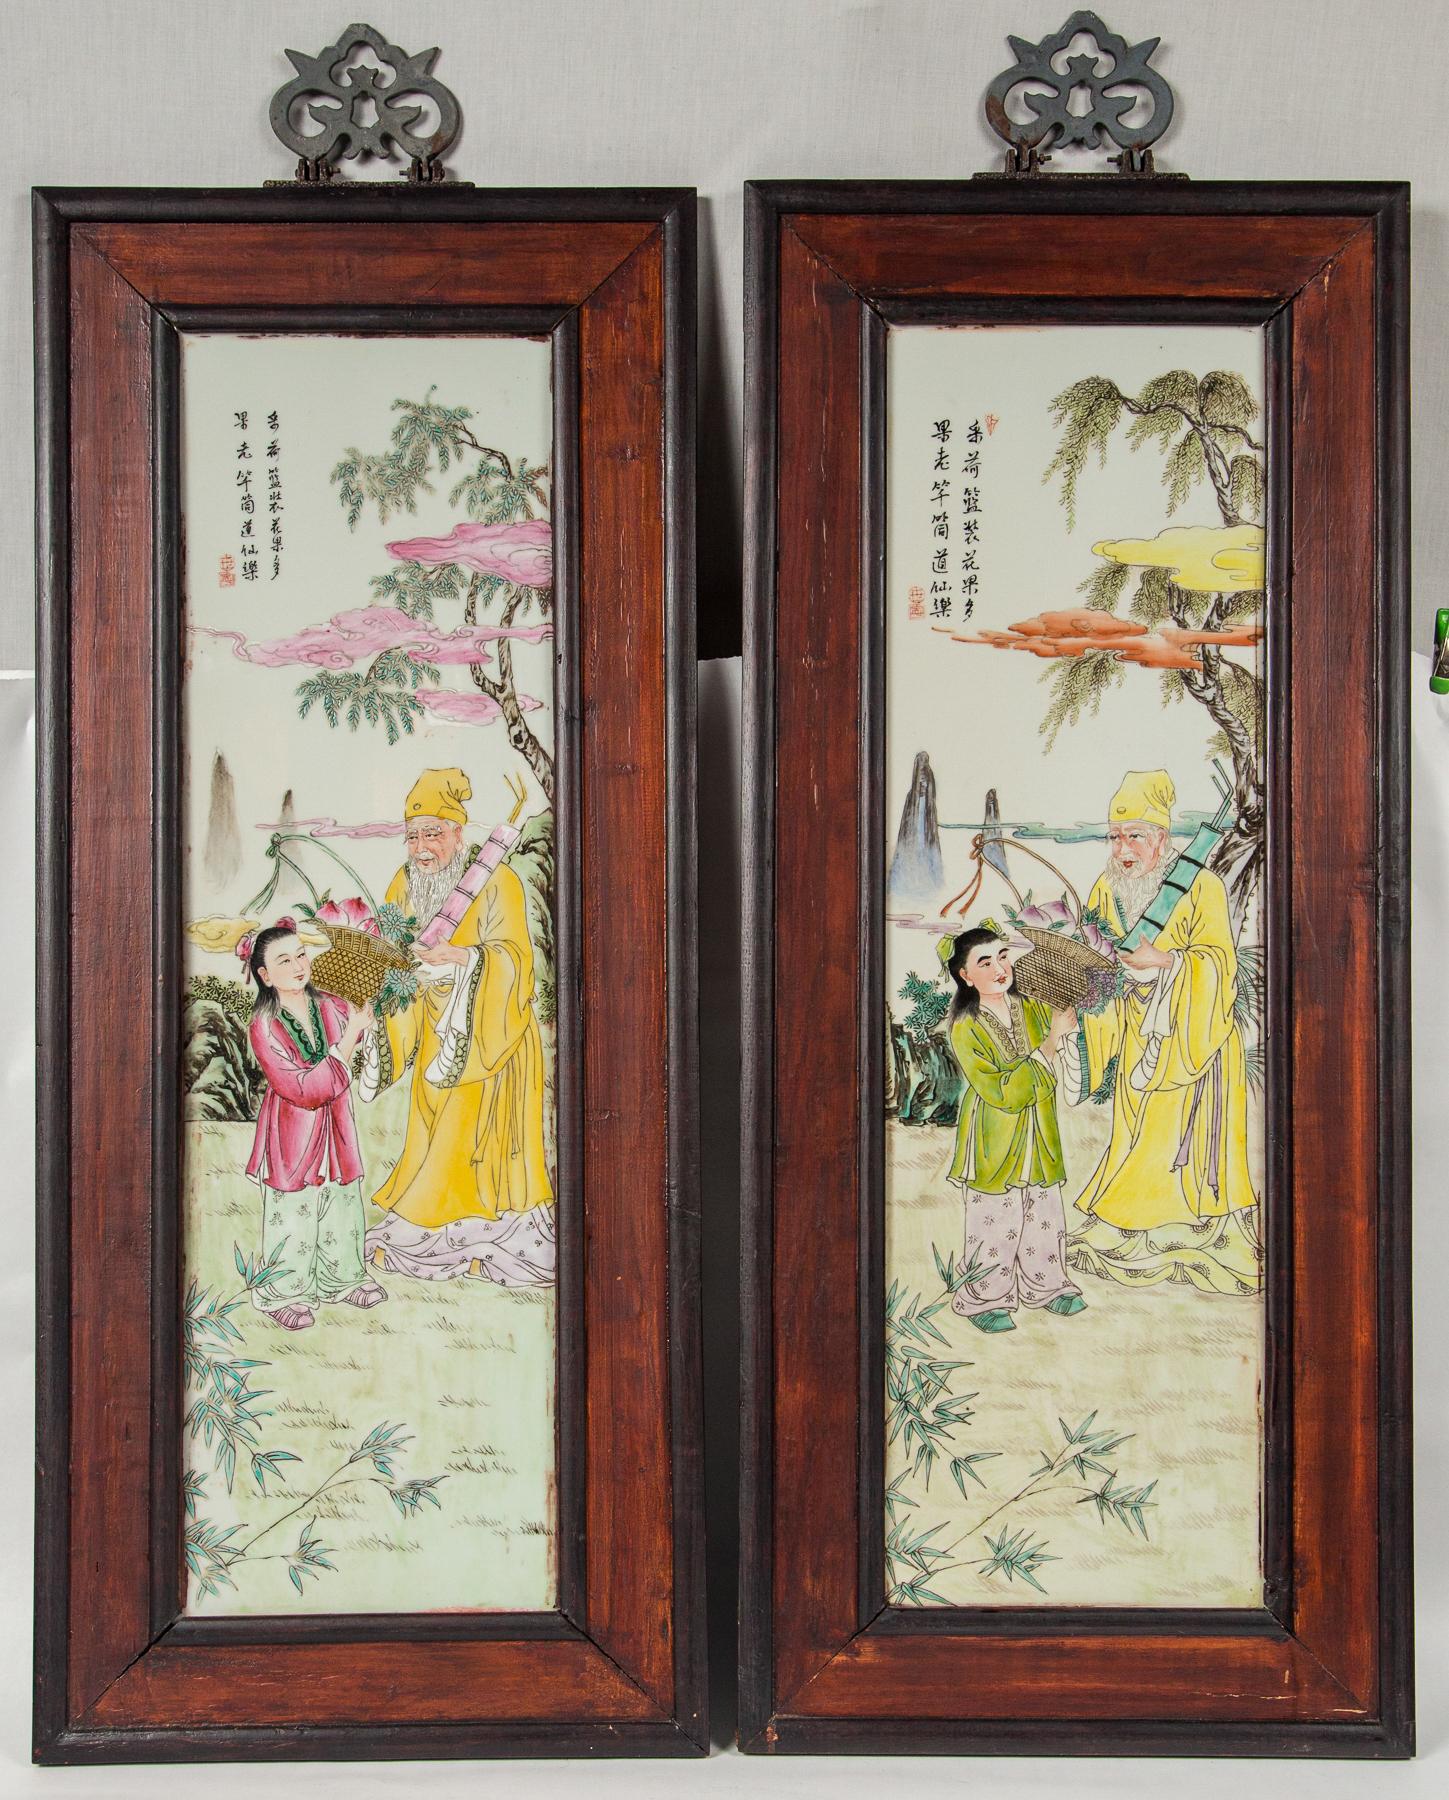 Wooden frames around the 4 plaques, each depicting different figures in a landscape setting.